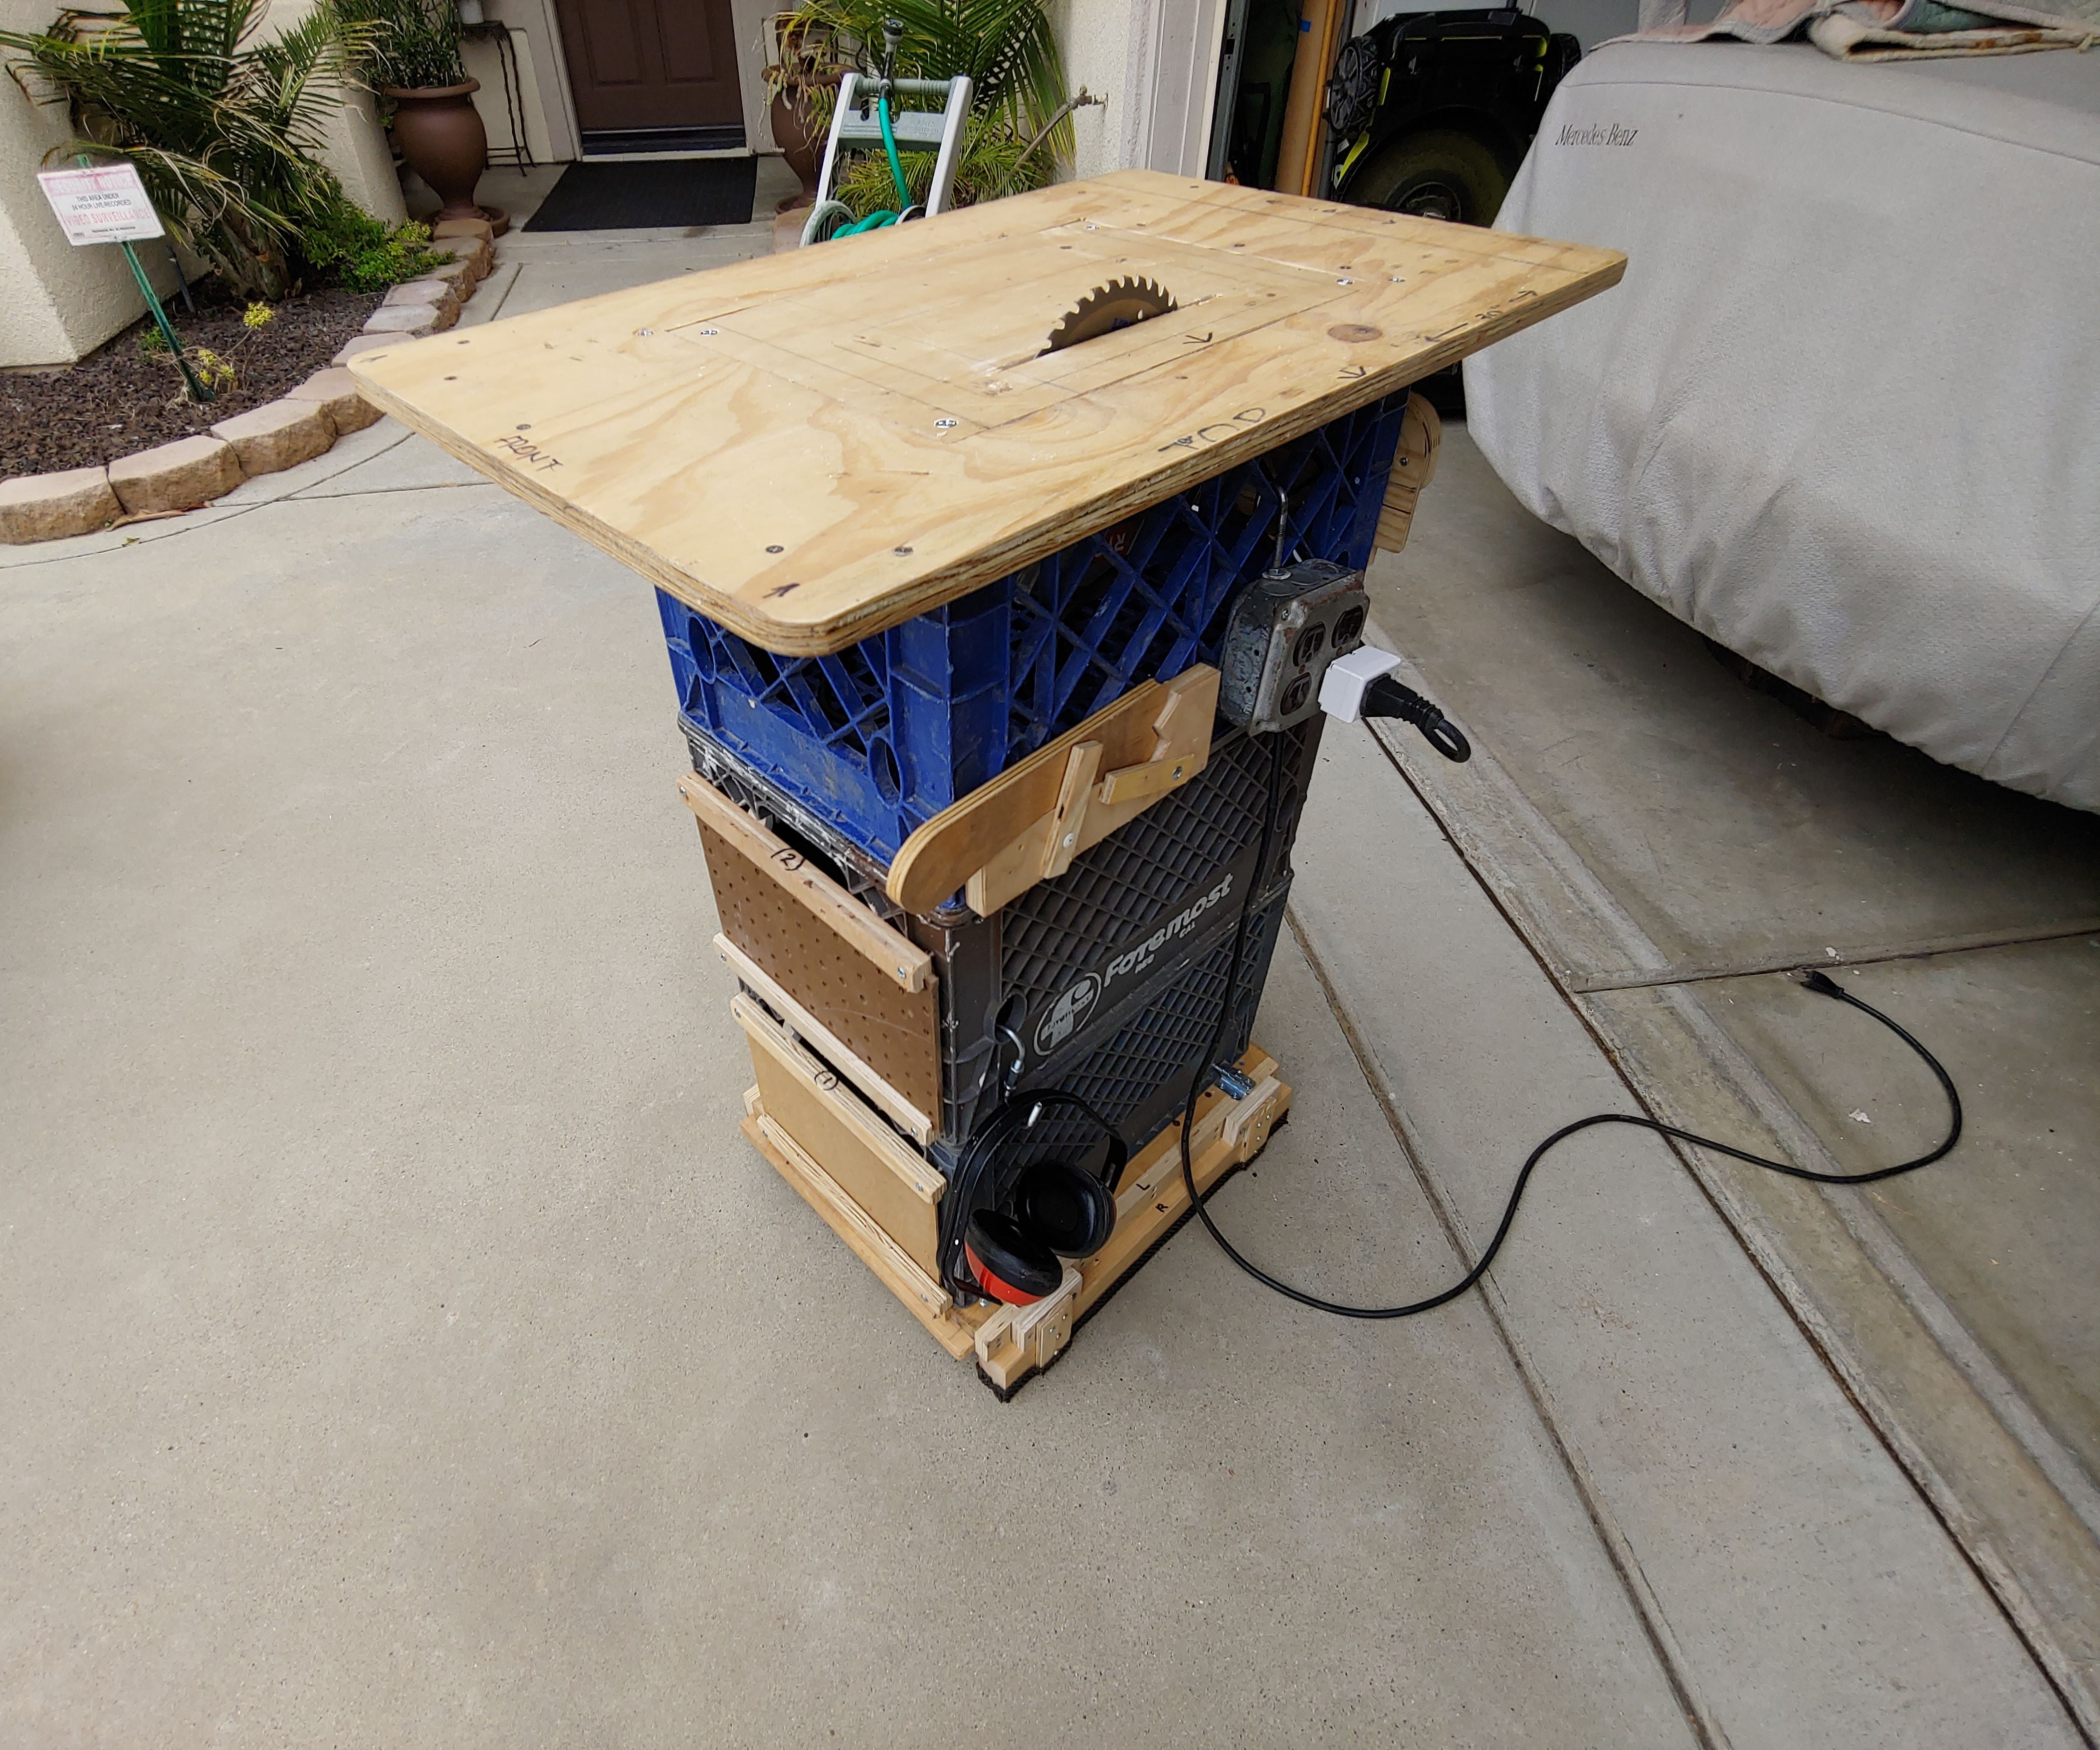 Plastic Crate Table Saw